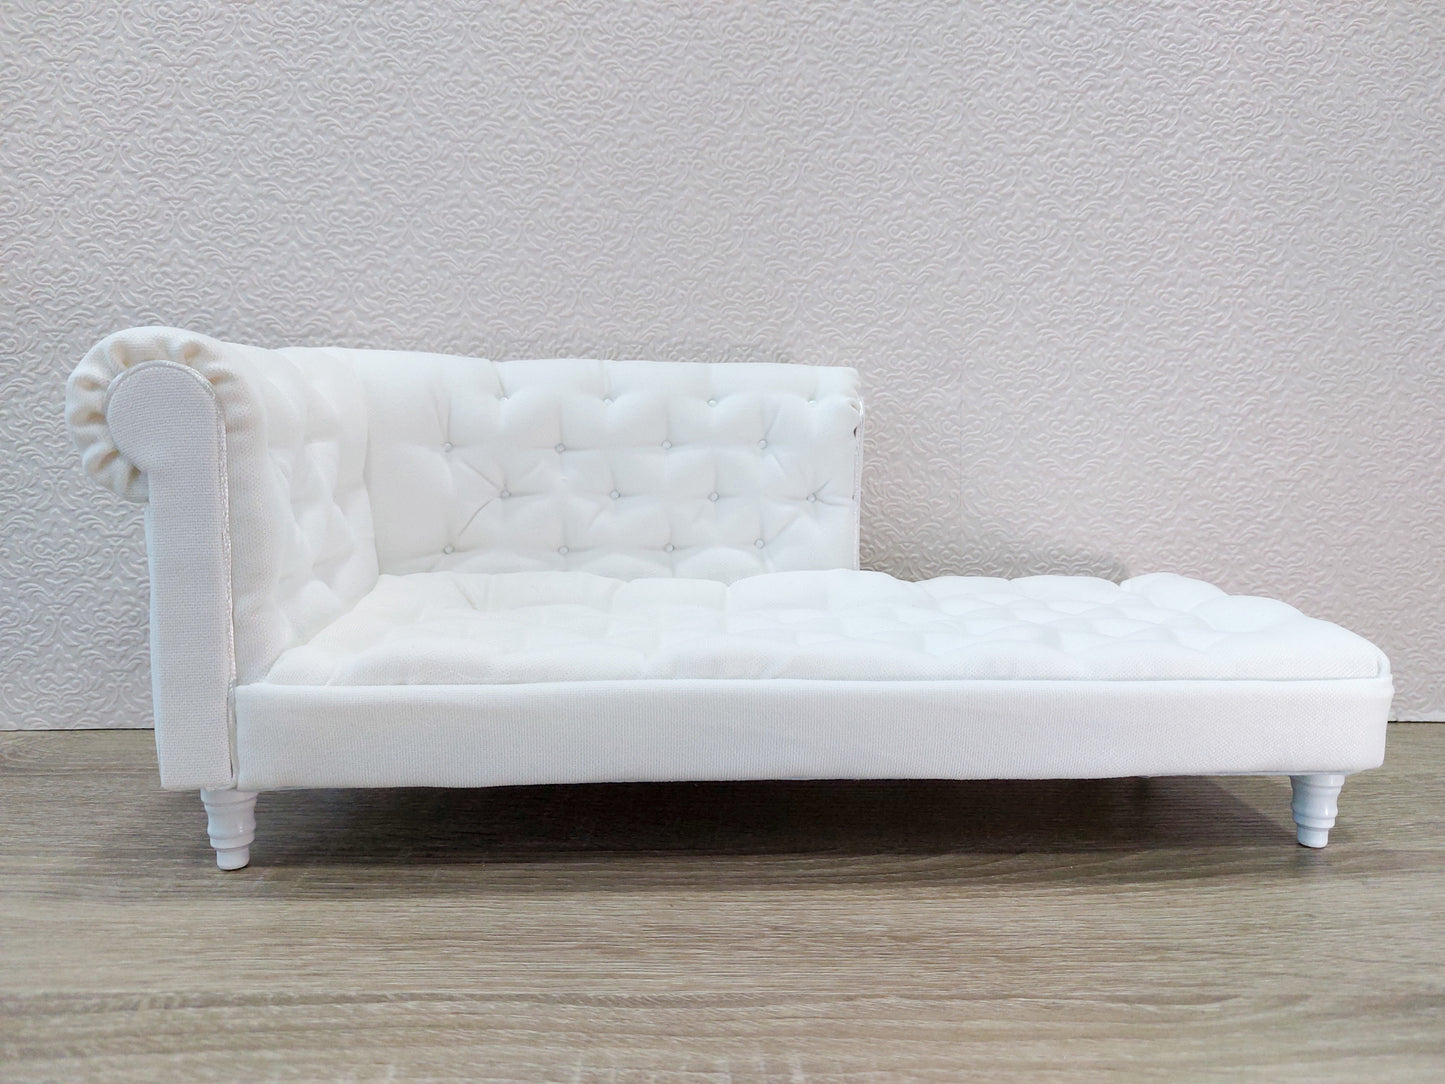 Chesterfield chaise lounge, white